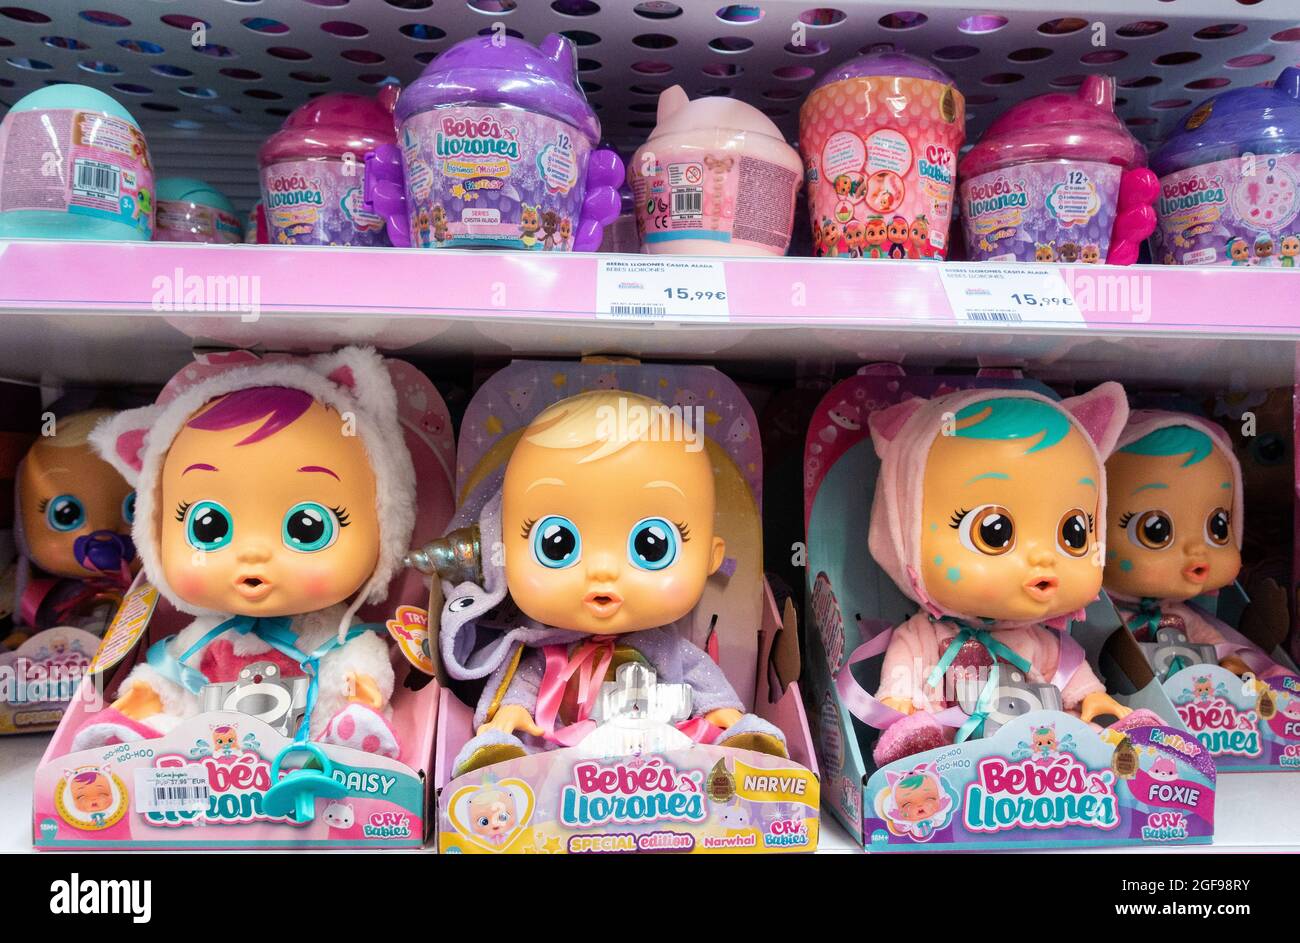 Cry Babies dolls (Bebes Spanish) in toy store in Spain Stock Photo - Alamy